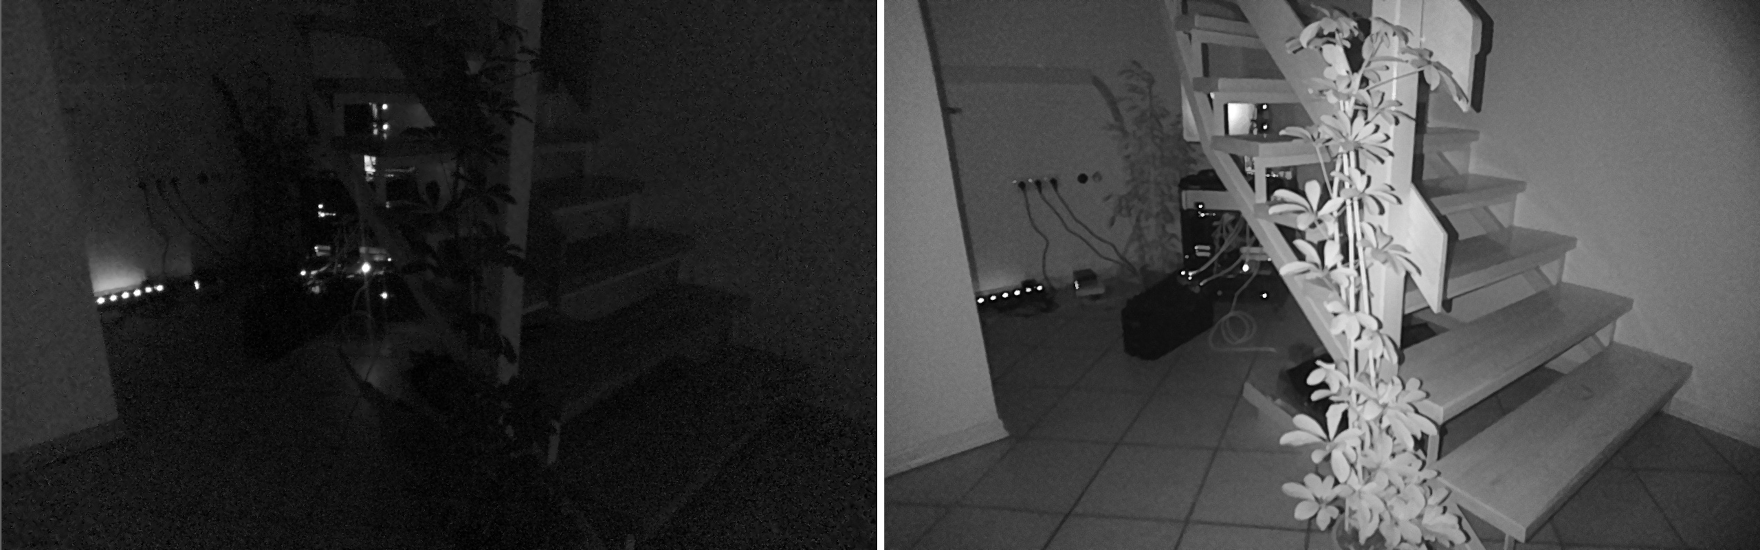 Night vision mode (right)